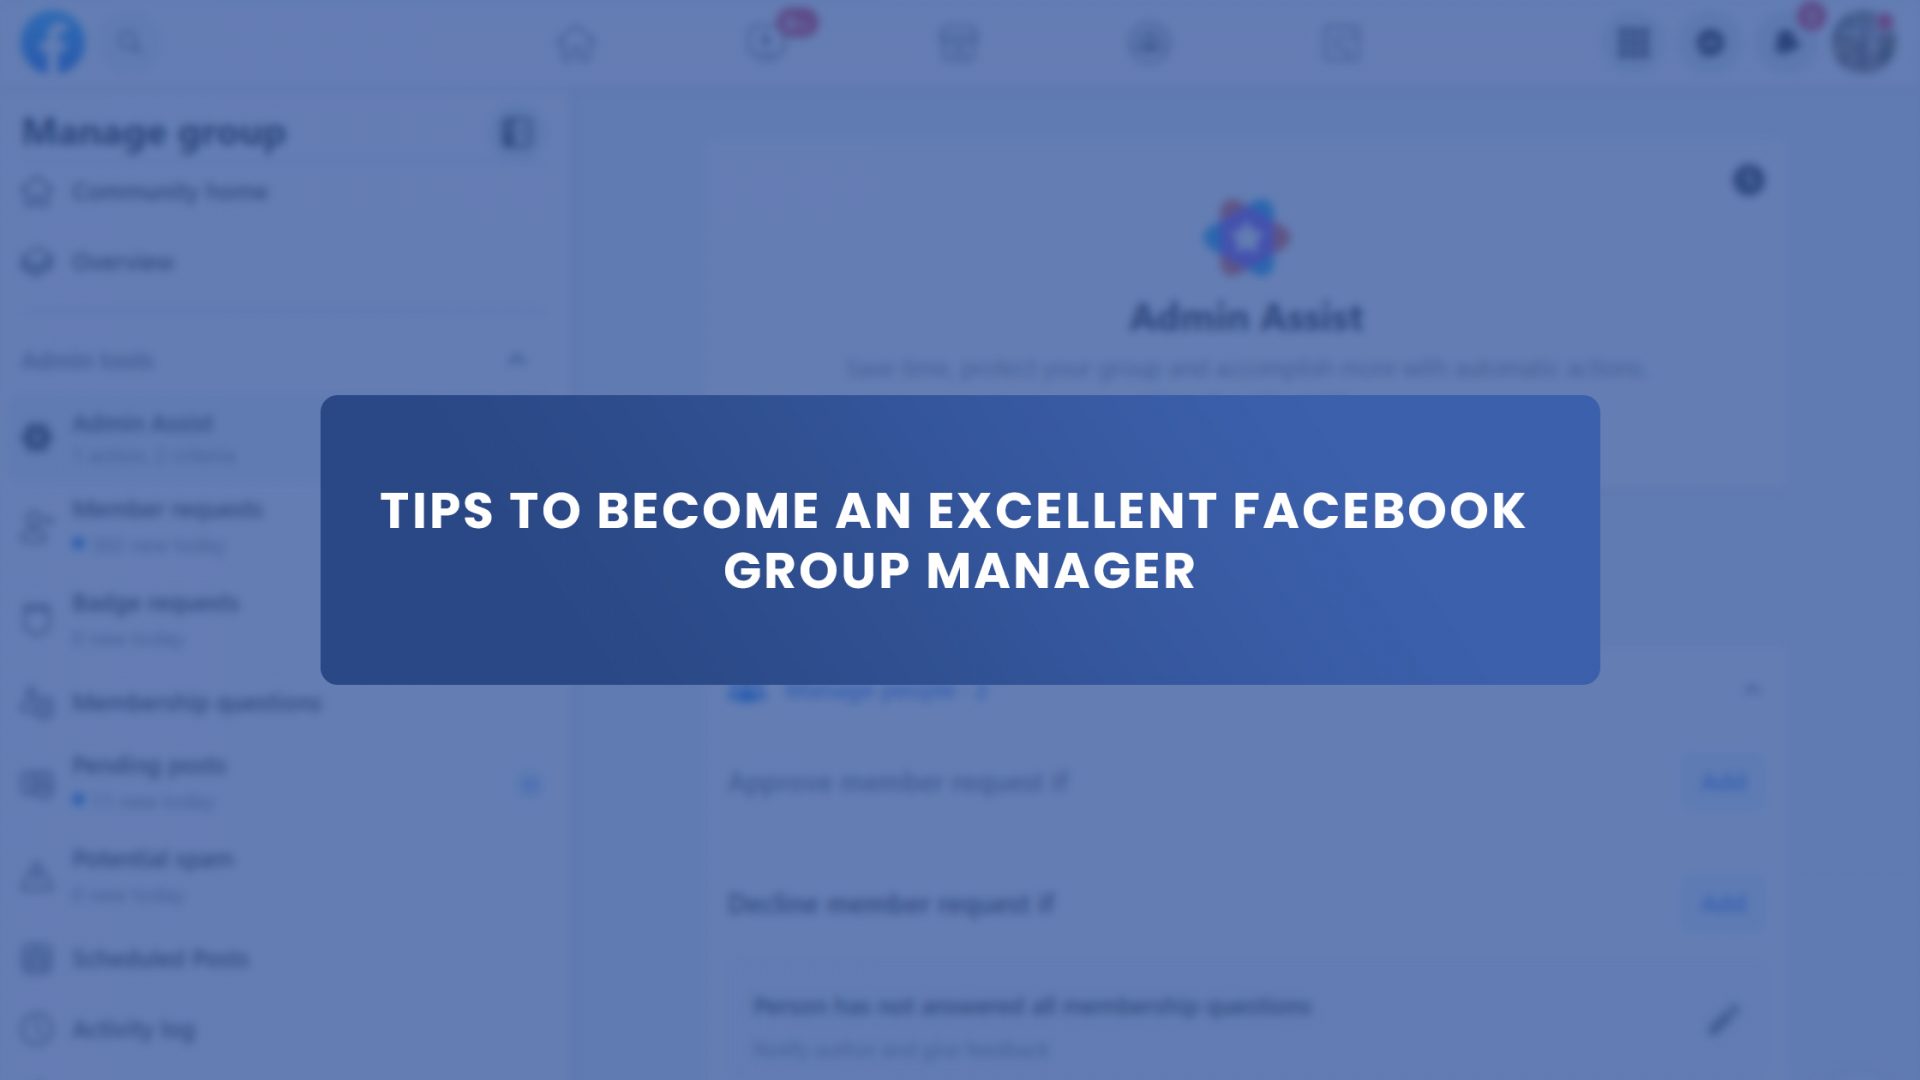 Tips to Become an Excellent Facebook Group Manager